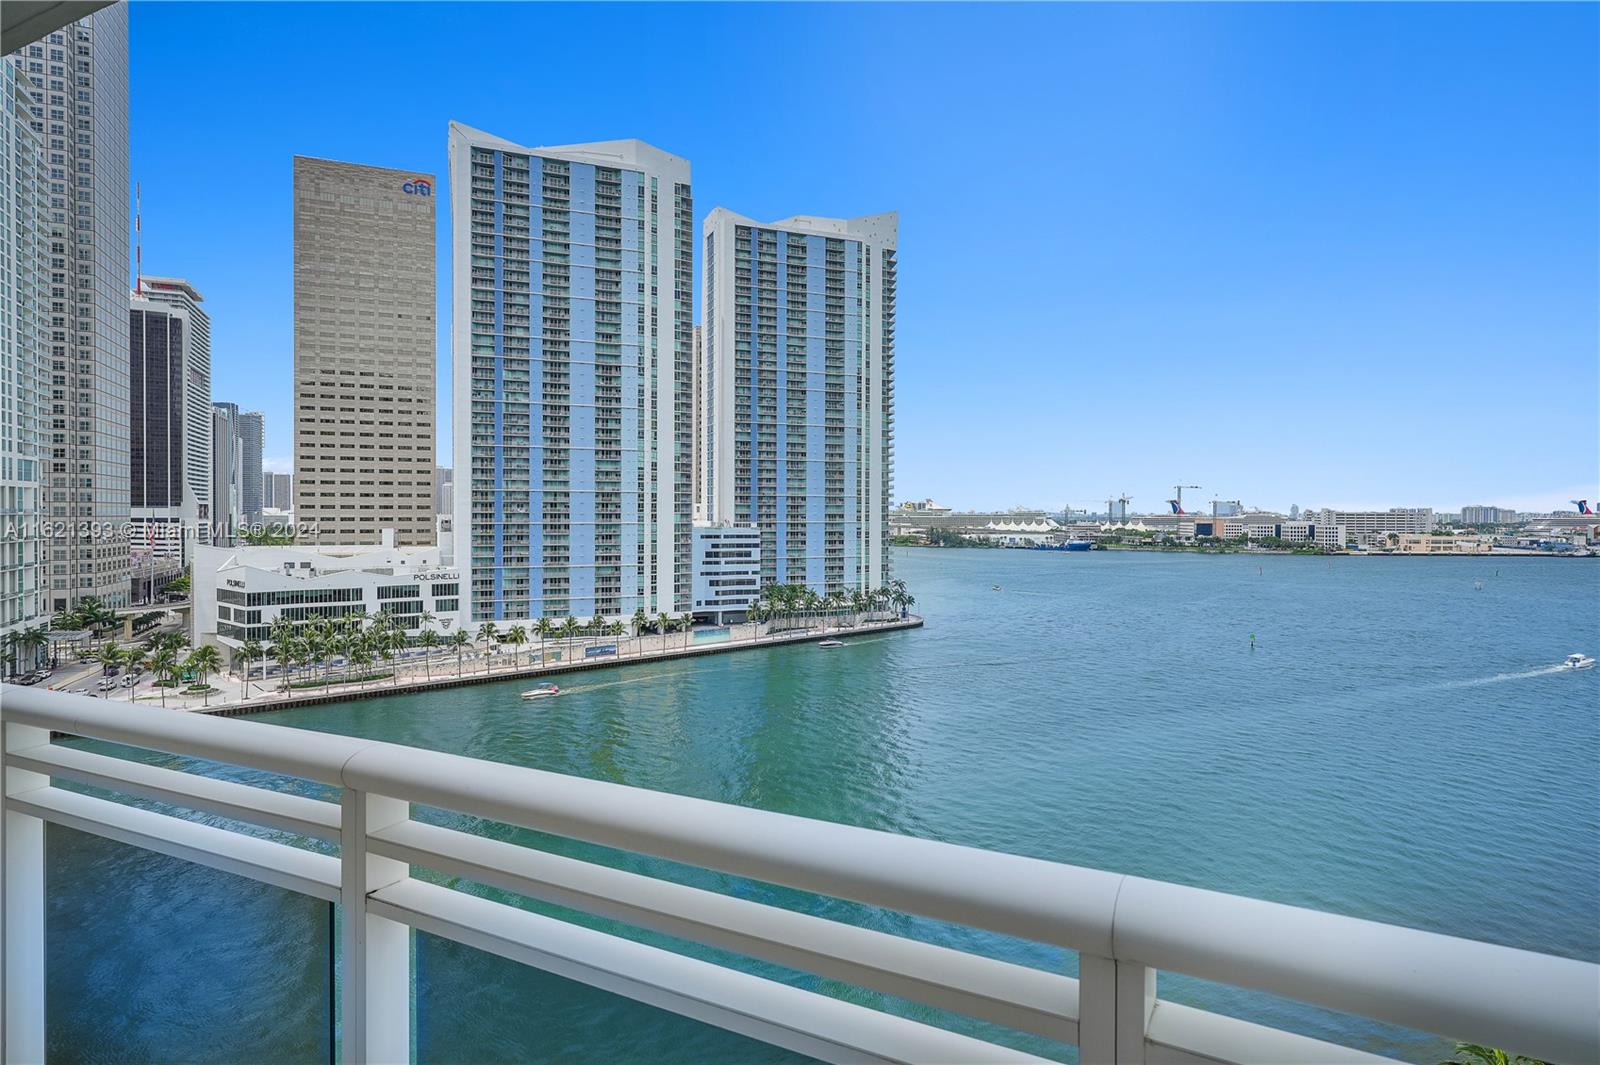 Incredible island views from this 2 bedroom home on the water. Located at luxurious Brickell Key located on exclusive Brickell Key Island. Open kitchen. Marble floors. Electric shades. Split floor plan offers privacy for both bedrooms. Carbonell offers top amenities including 2 tennis courts, golf putting area, indoor racquetball court, indoor basketball court, heated swimming pool great for lap swimming, jacuzzi, BBQ area, childrens playroom, party room, conference room, computer room, 2 story gym with the latest equipment. Brickell Key offers top amenities with a short bridge leading you from private island life to exciting restaurants and nightlife.